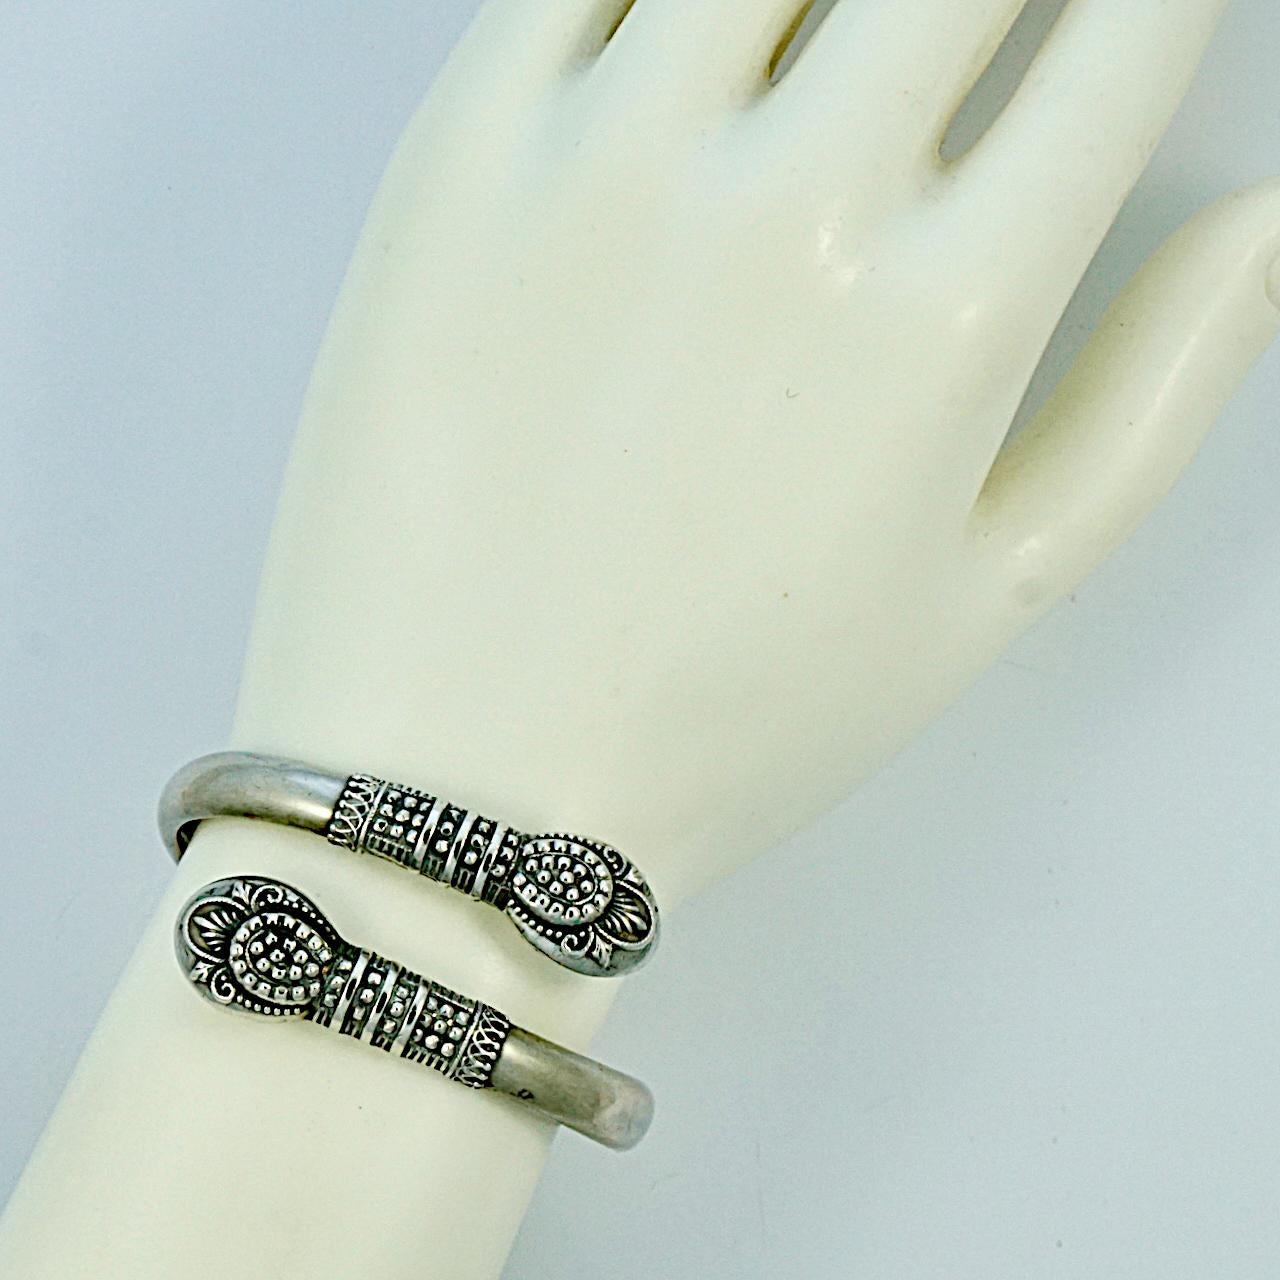 Antique Victorian Ornate Silver Bangle Bracelet In Good Condition For Sale In London, GB